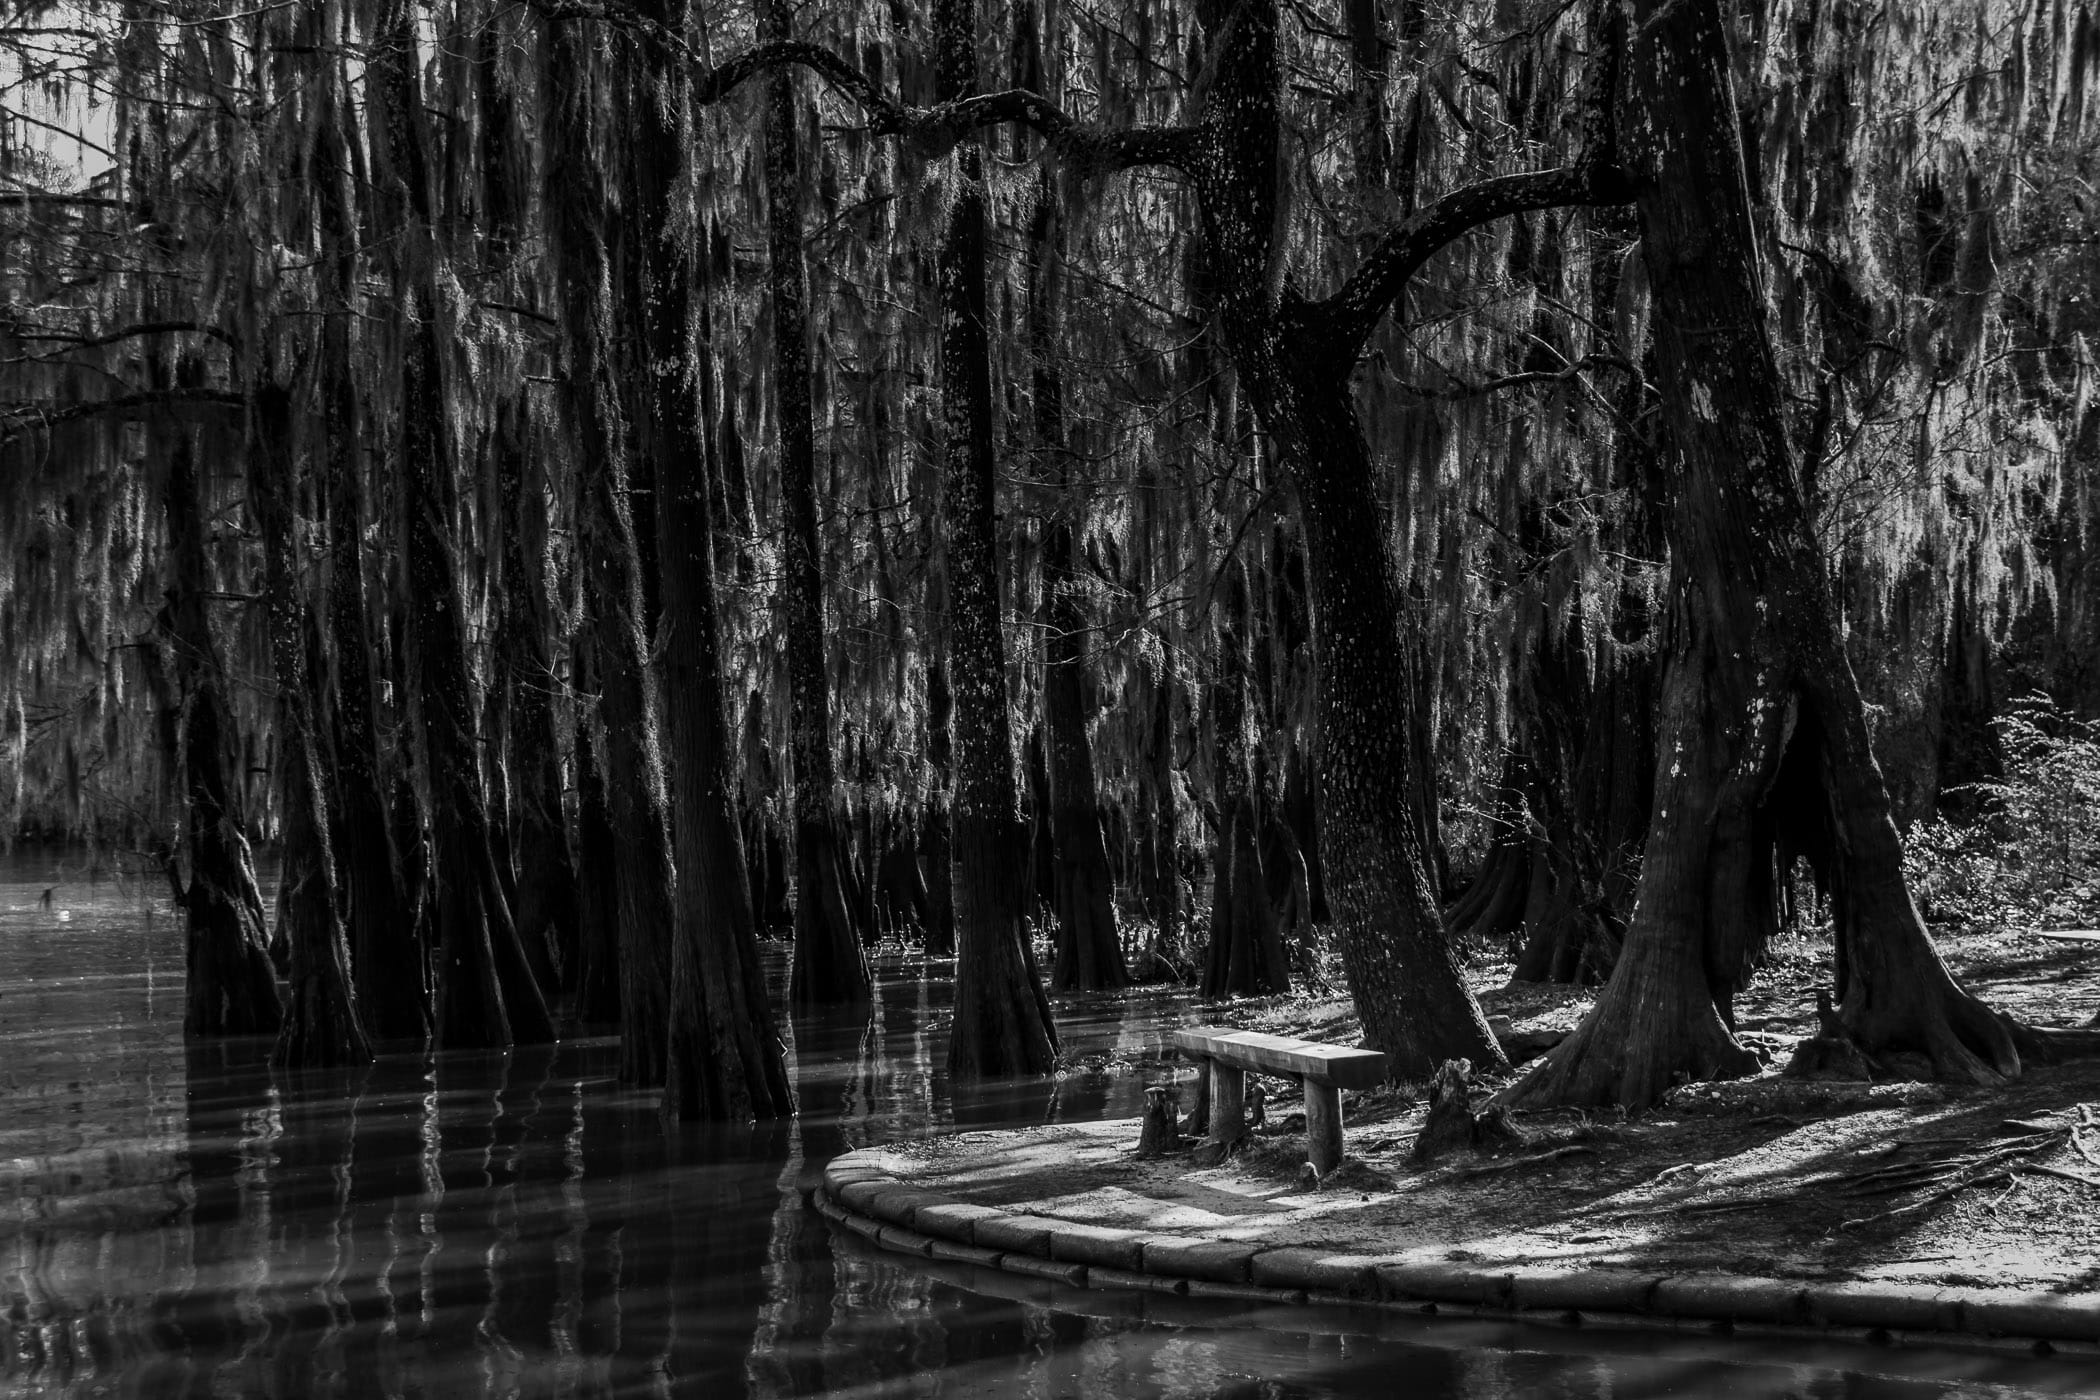 Cypress trees rise around a bench at Caddo Lake State Park, Texas.